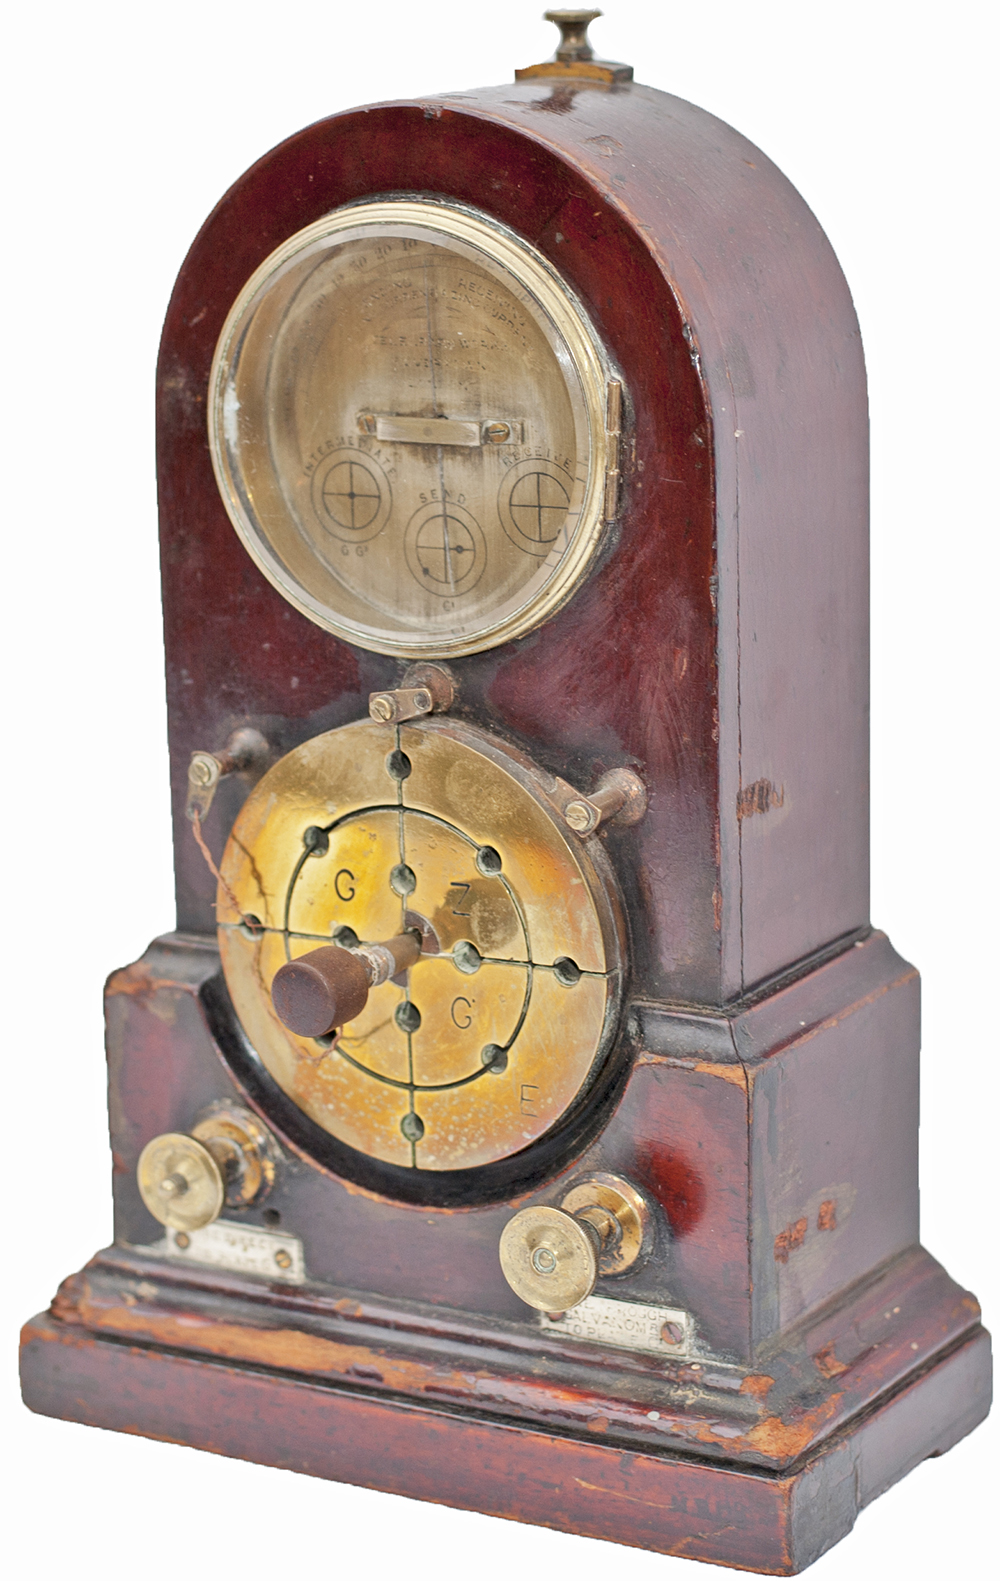 Midland Railway mahogany cased Telegraph Test Instrument marked on the dial TELEGRAPH WORKS